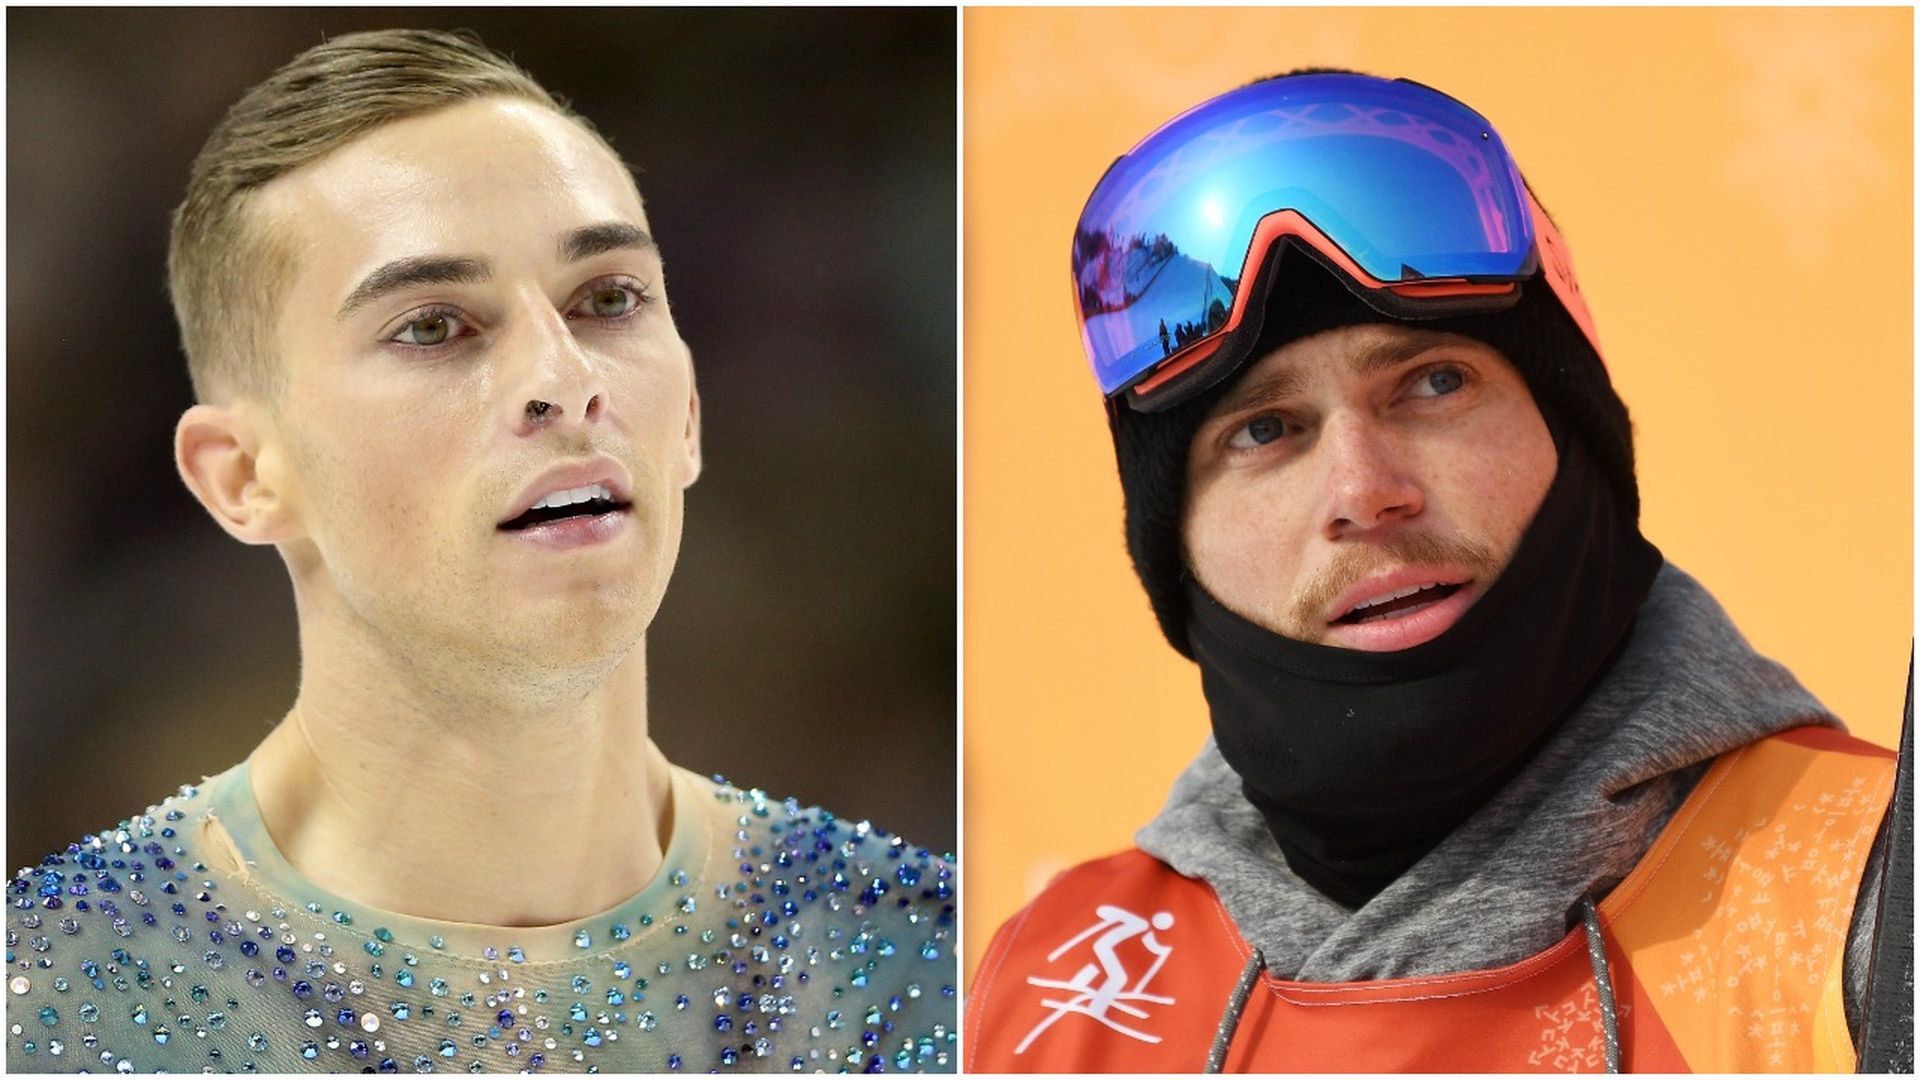 Adam Rippon in a skating uniform on the left and Gus Kenworthy in ski gear on the right